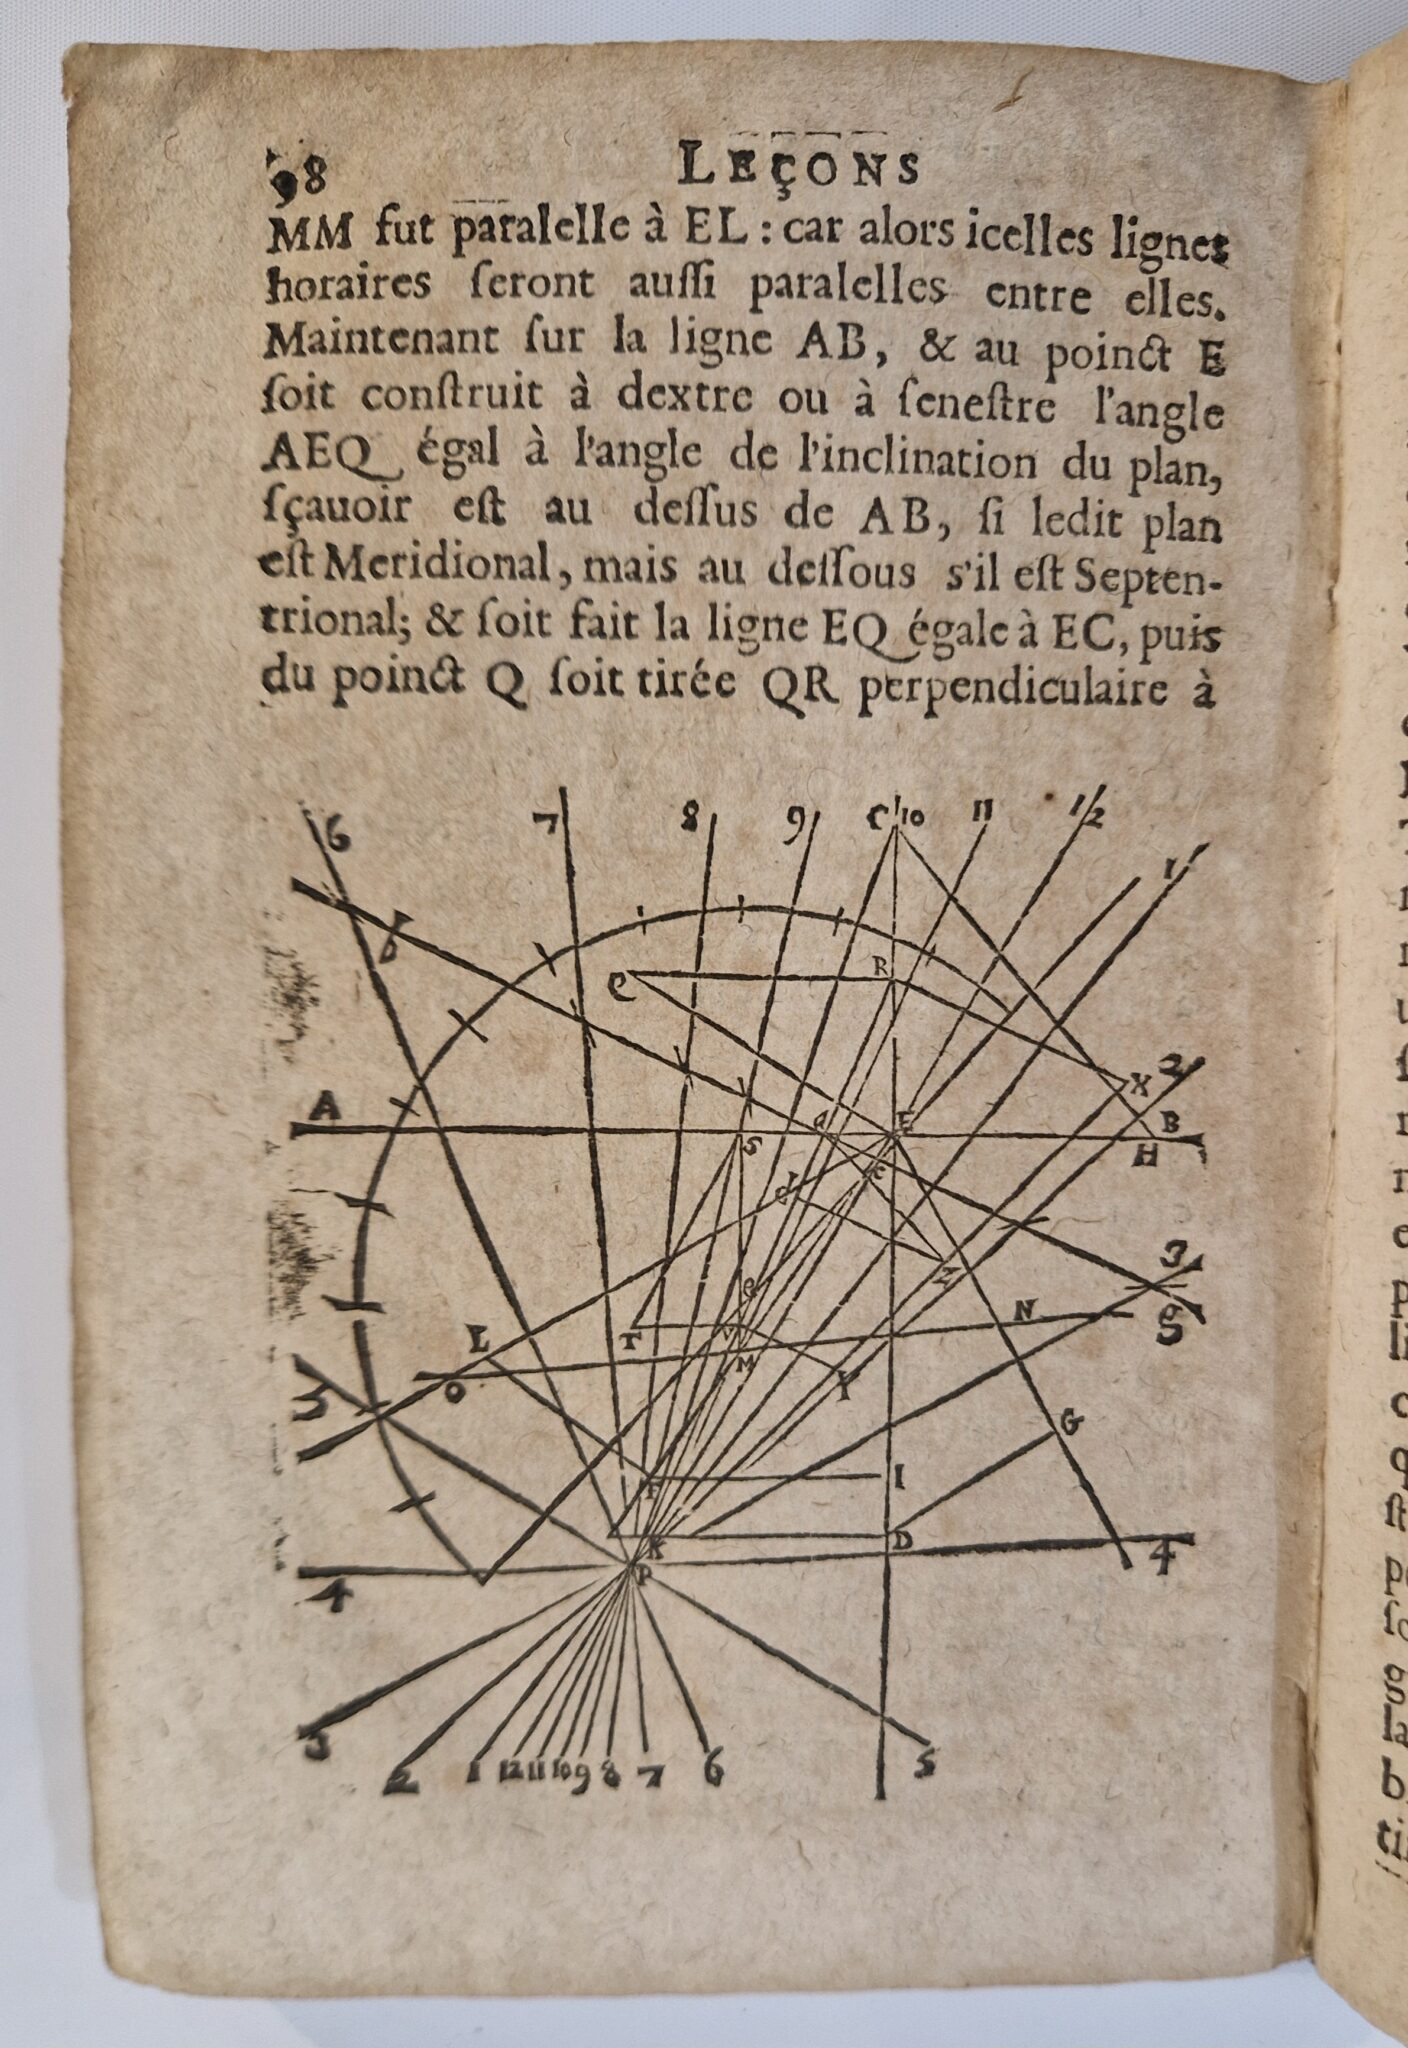 Henrion’s treatise on dialing rediscovered – 1619